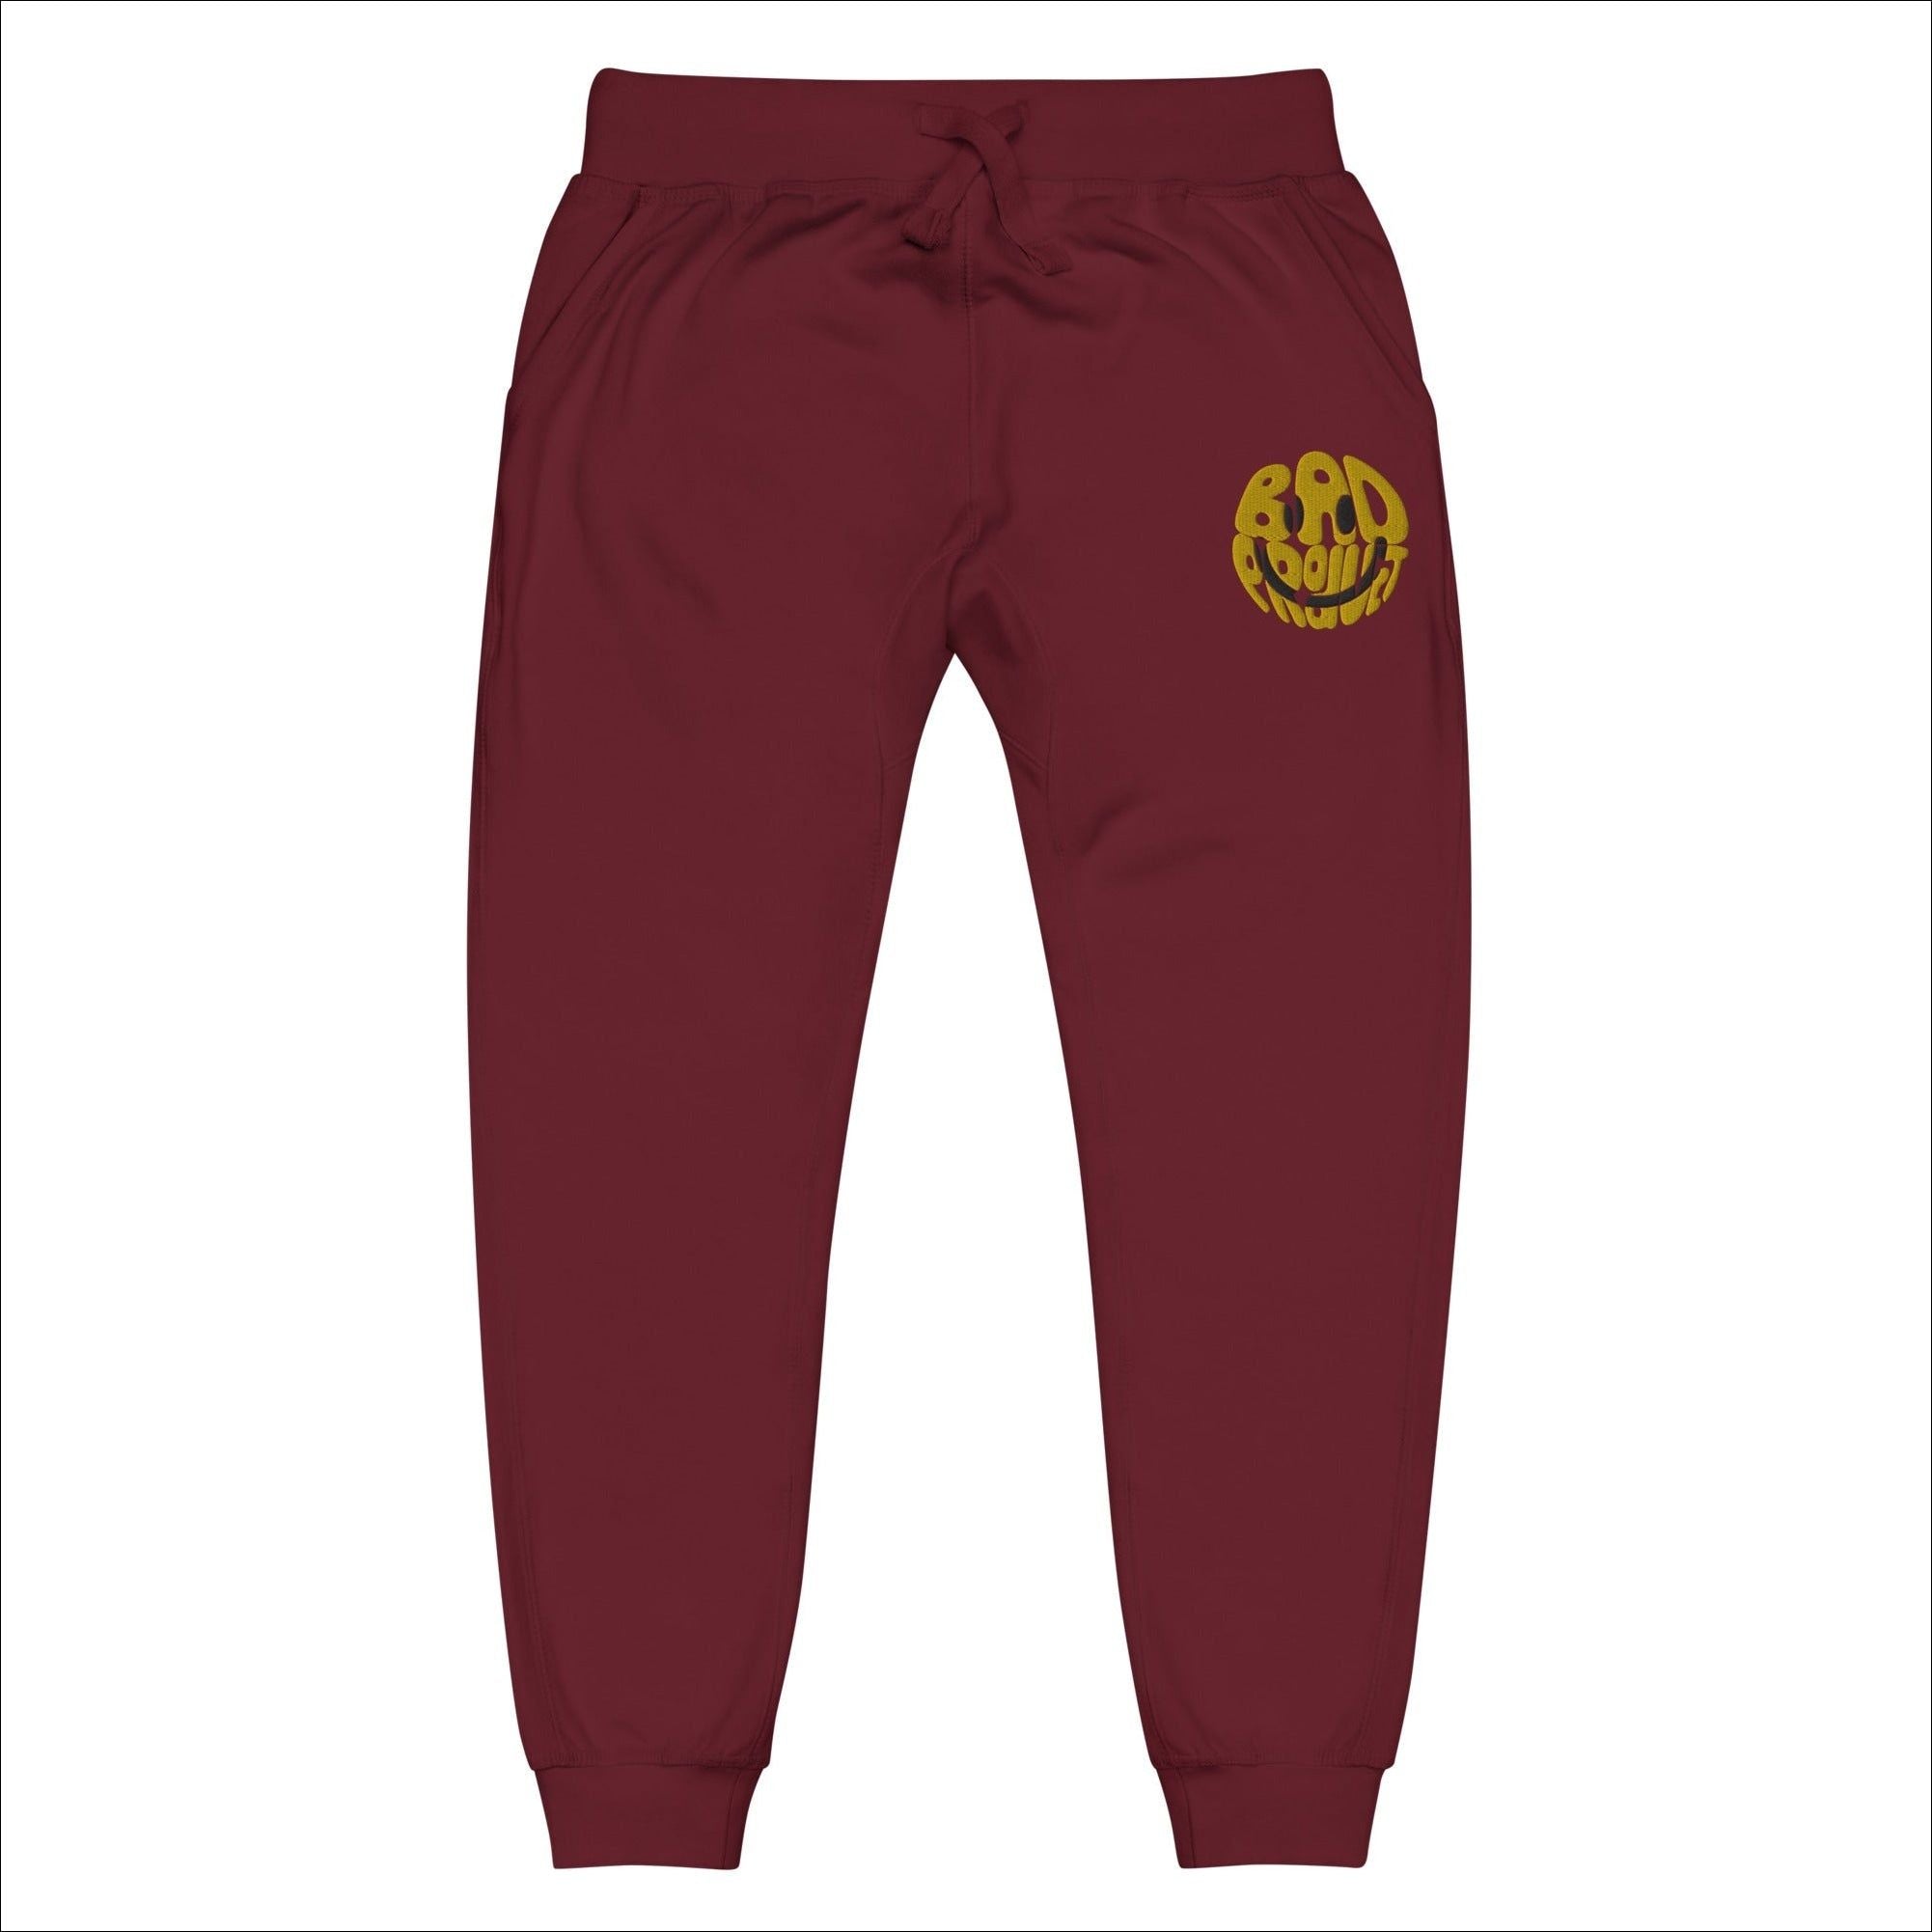 Maroon Embroidered Smiley Joggers with a gold smiley face detail